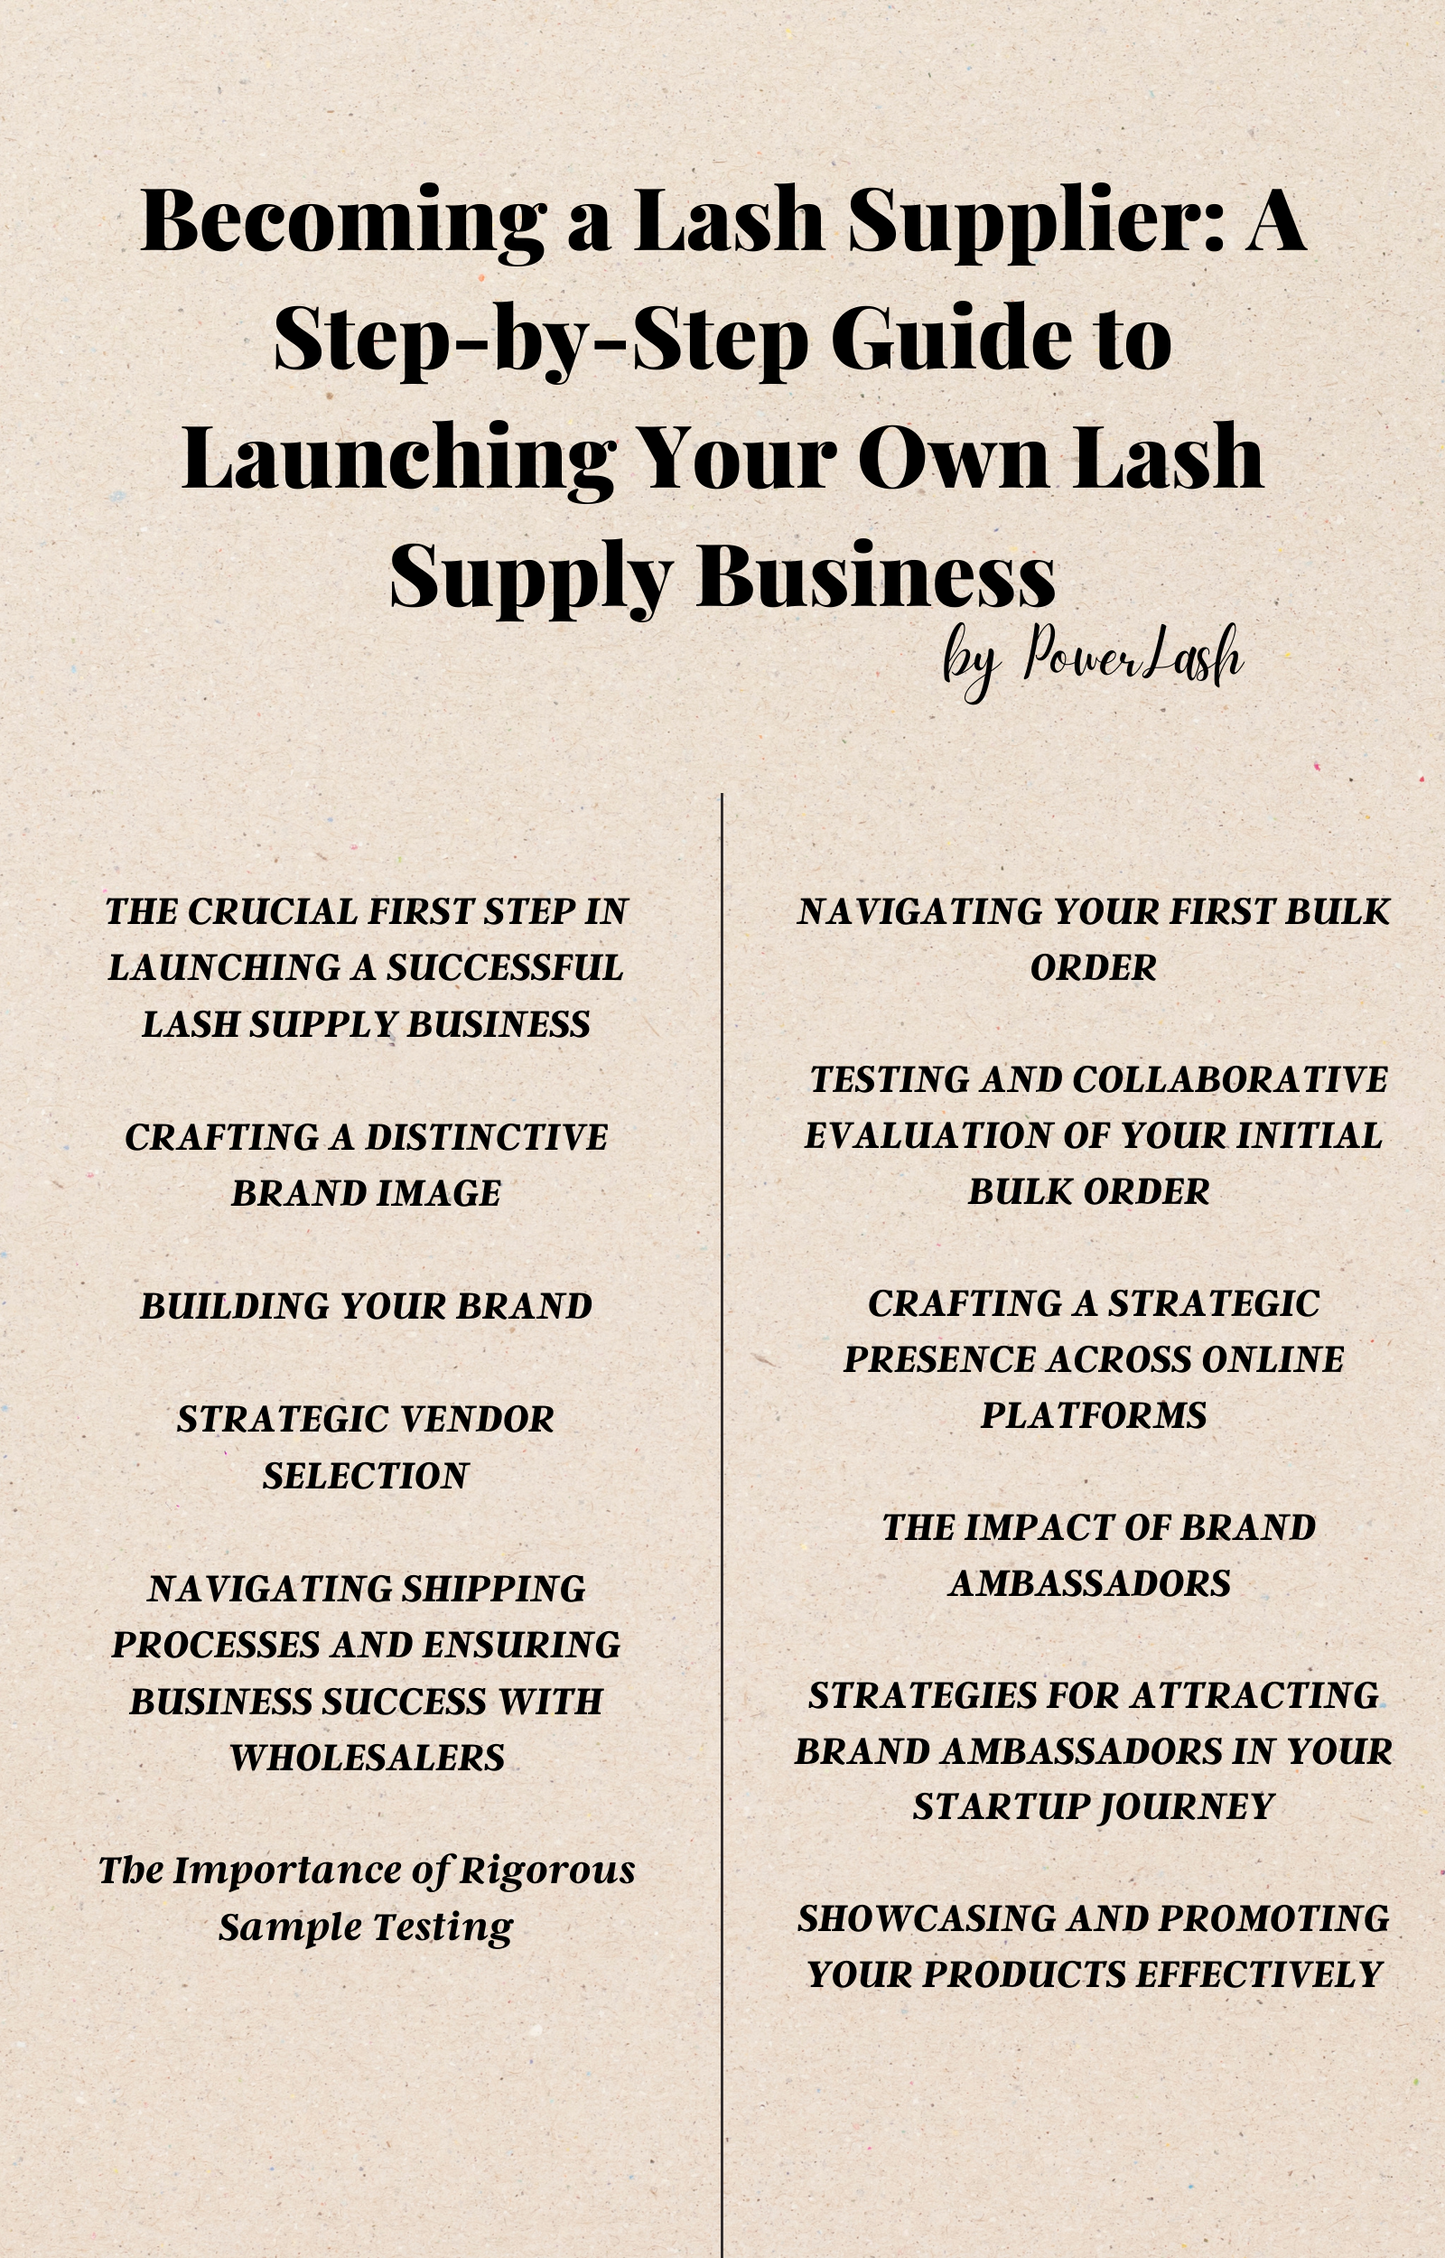 Becoming a Lash Supplier: A Step-by-Step Guide to Launching Your Own Lash Supply Business